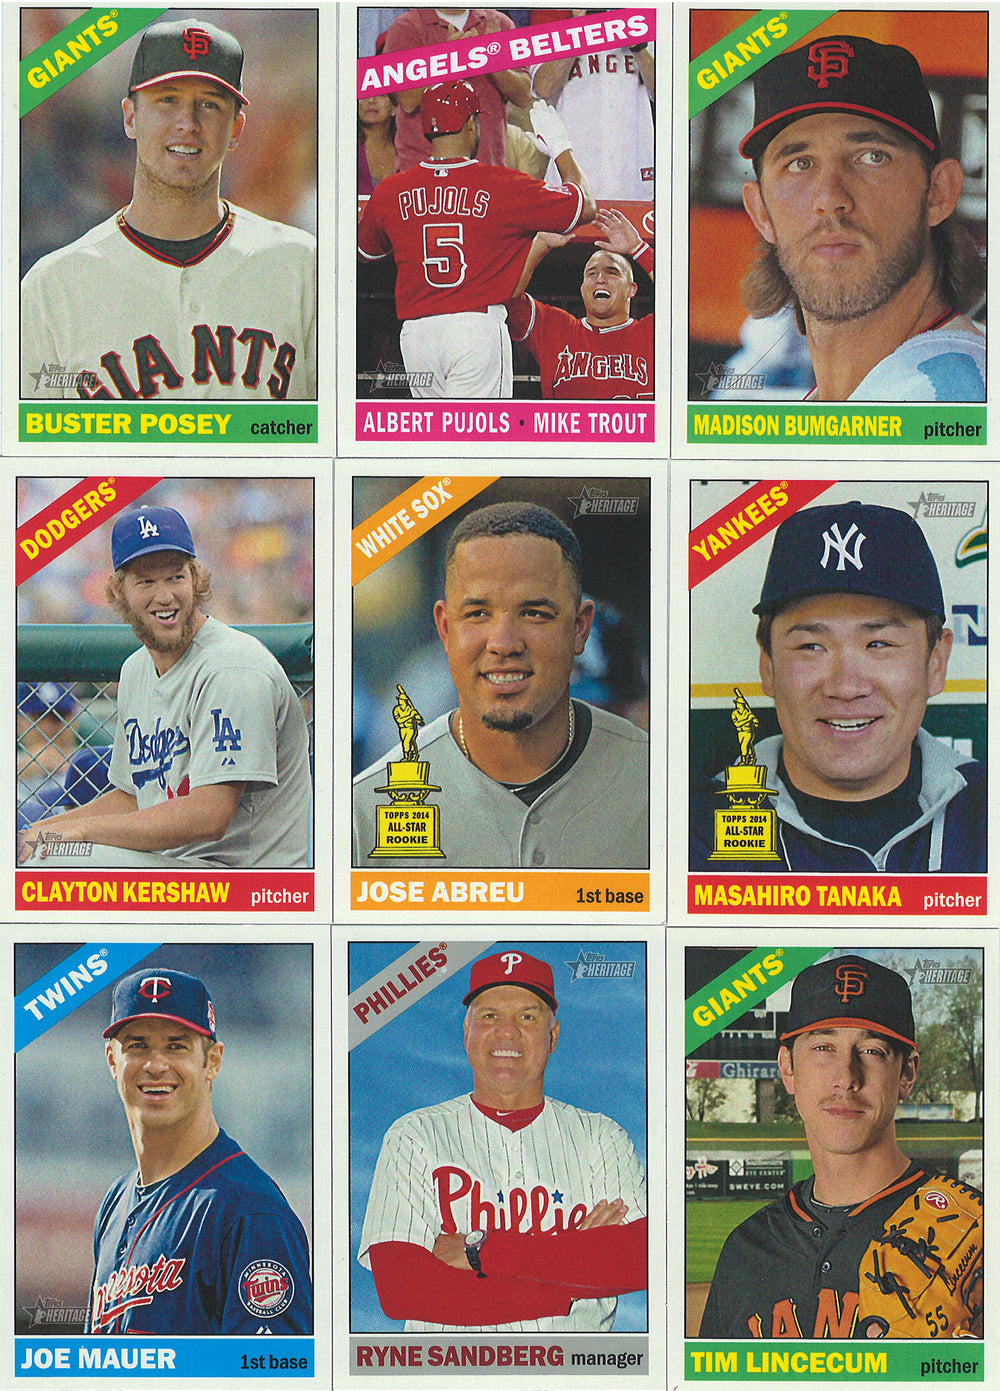 2015 topps heritage